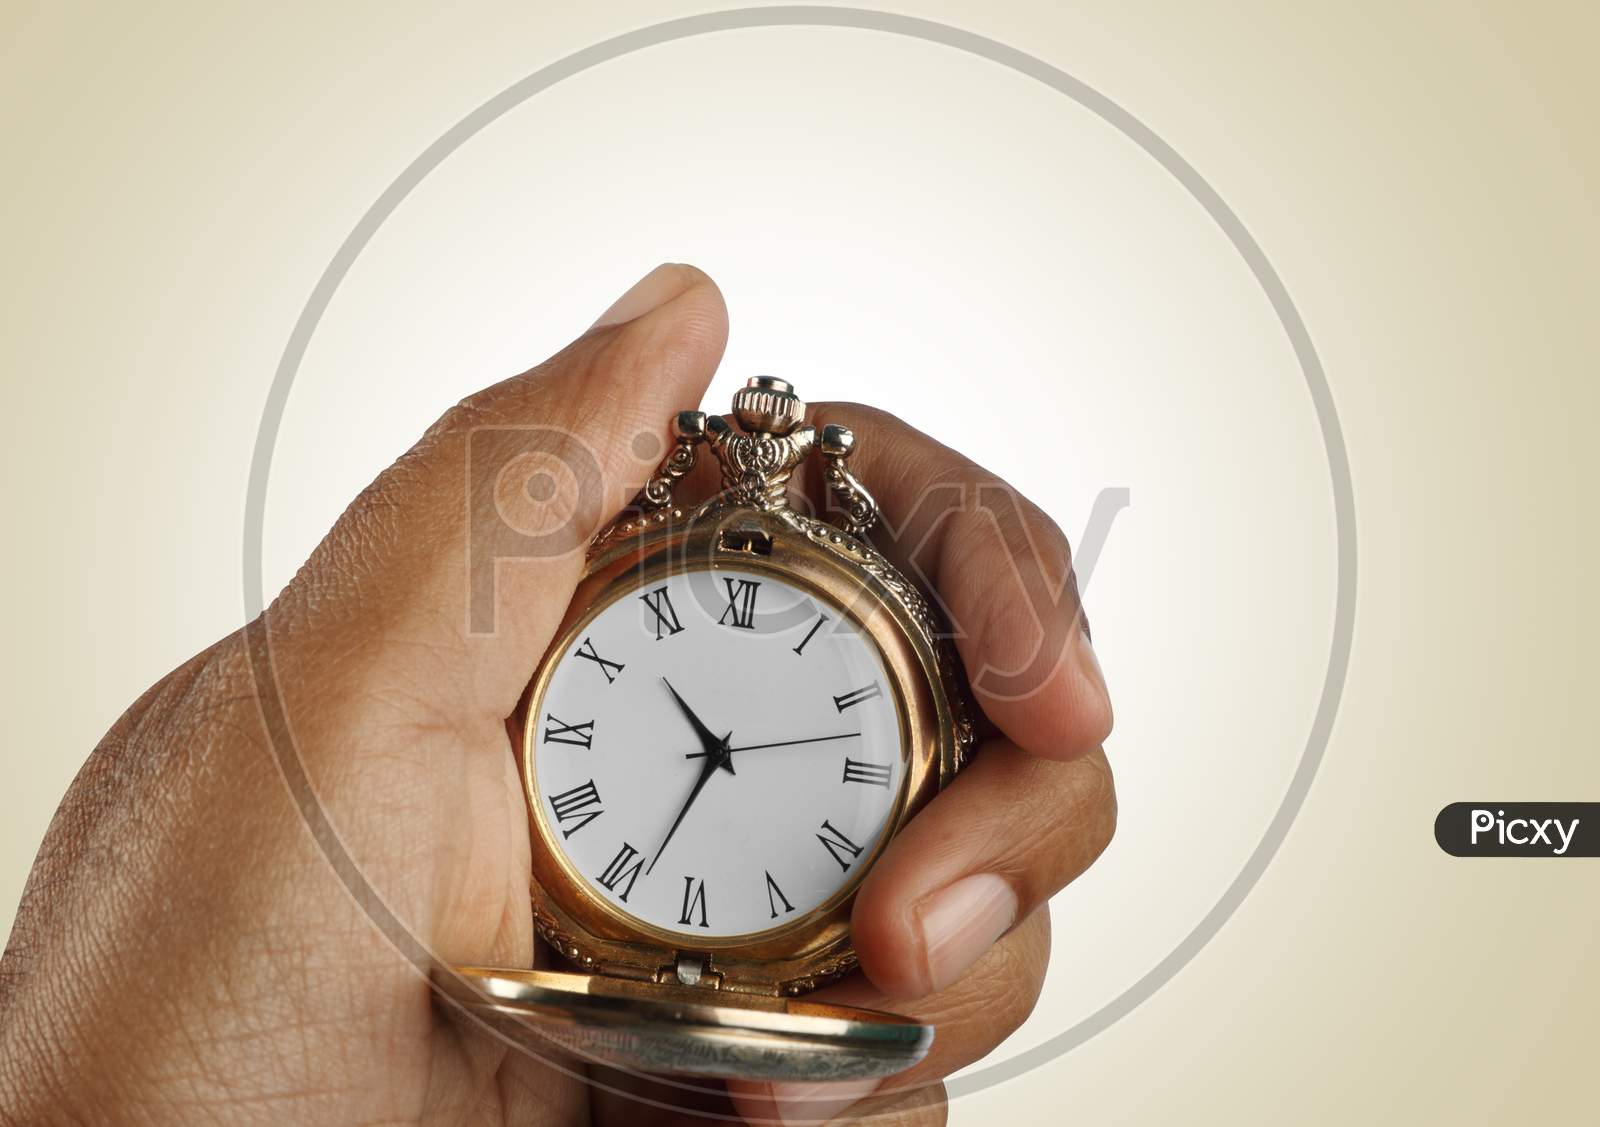 Old Golden Antique Watch In A Hand